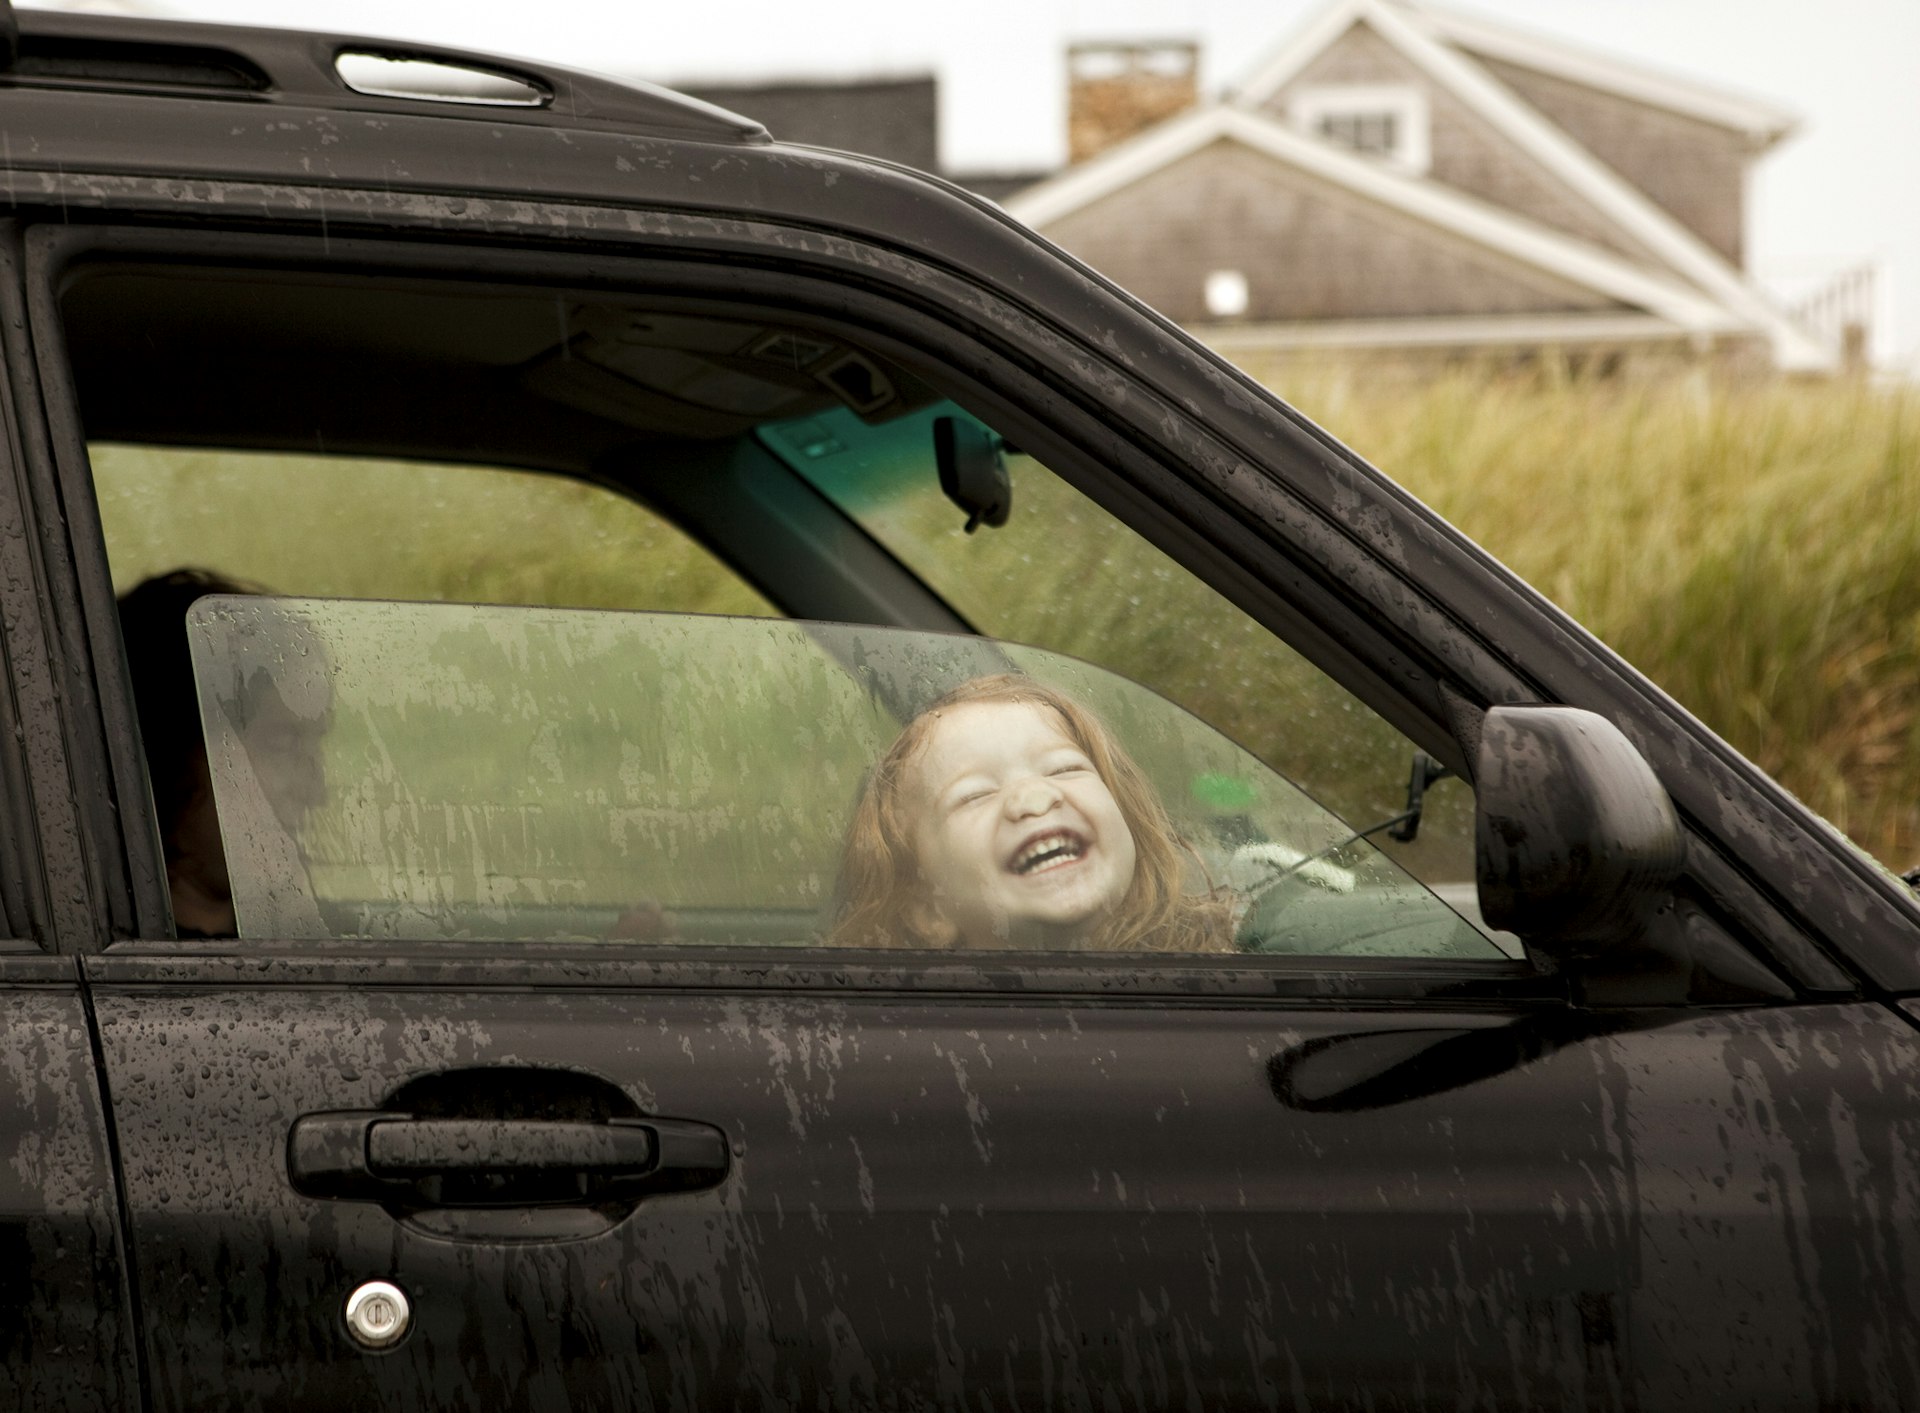 ginger-haired white girl, two or three years old, pressing her face against a half-open car window in a wet Cape Cod